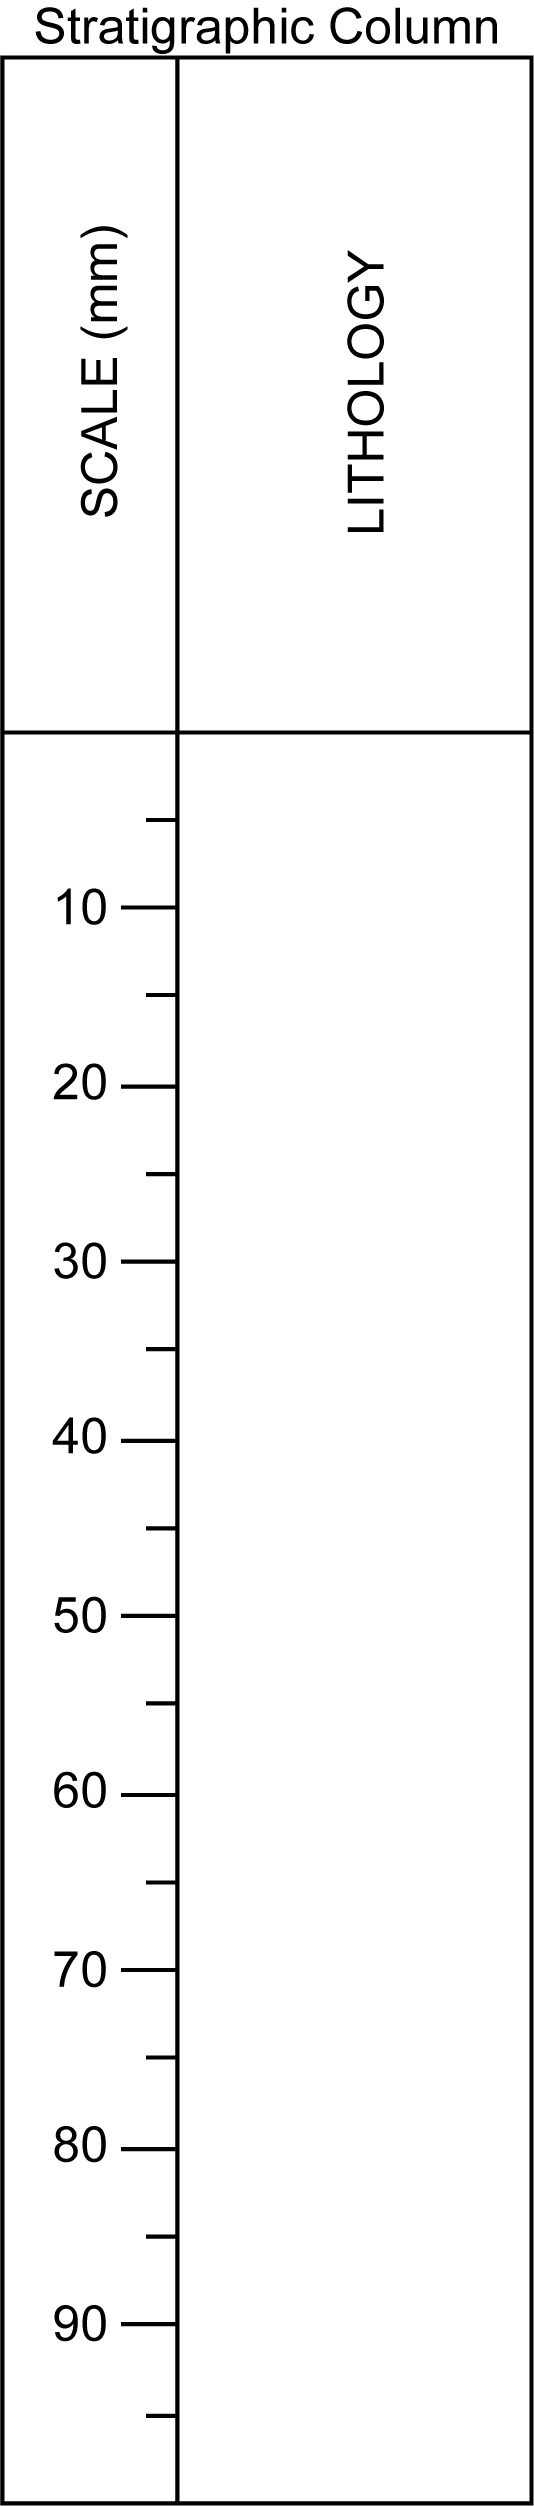 A blank stratigraphic column for Exercise 5.1.